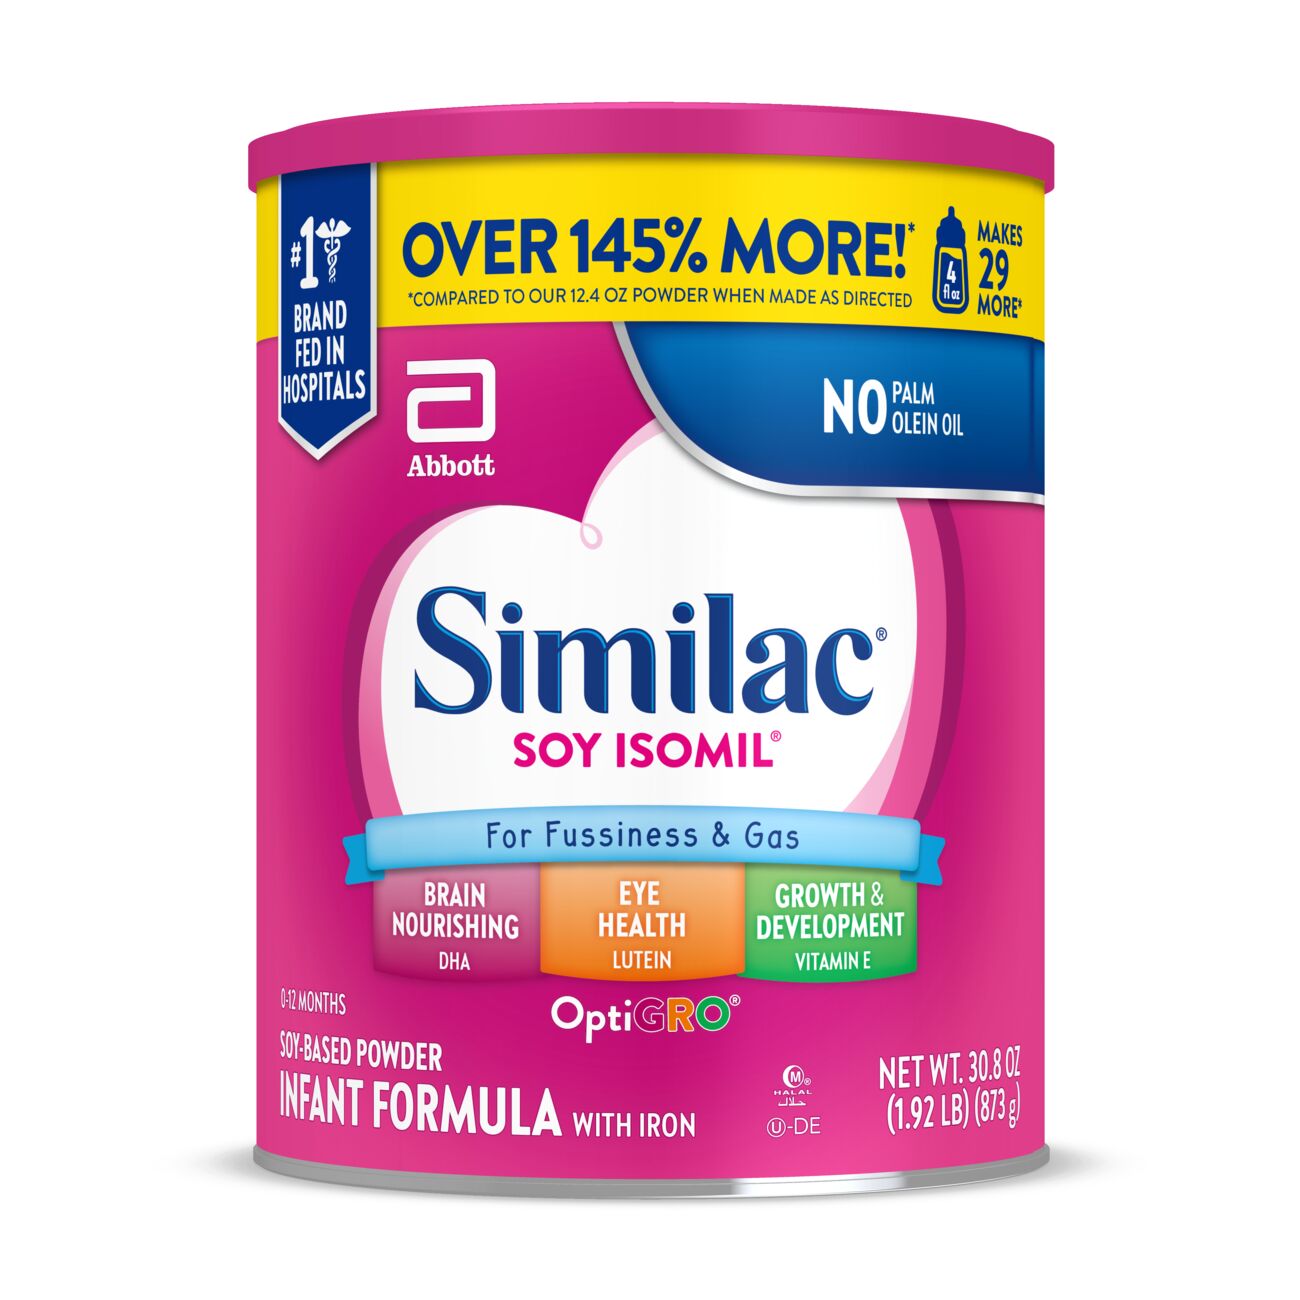 Similac Soy Isomil For Fussiness and Gas Infant Formula with Iron Powder 30.8 oz, 1CT